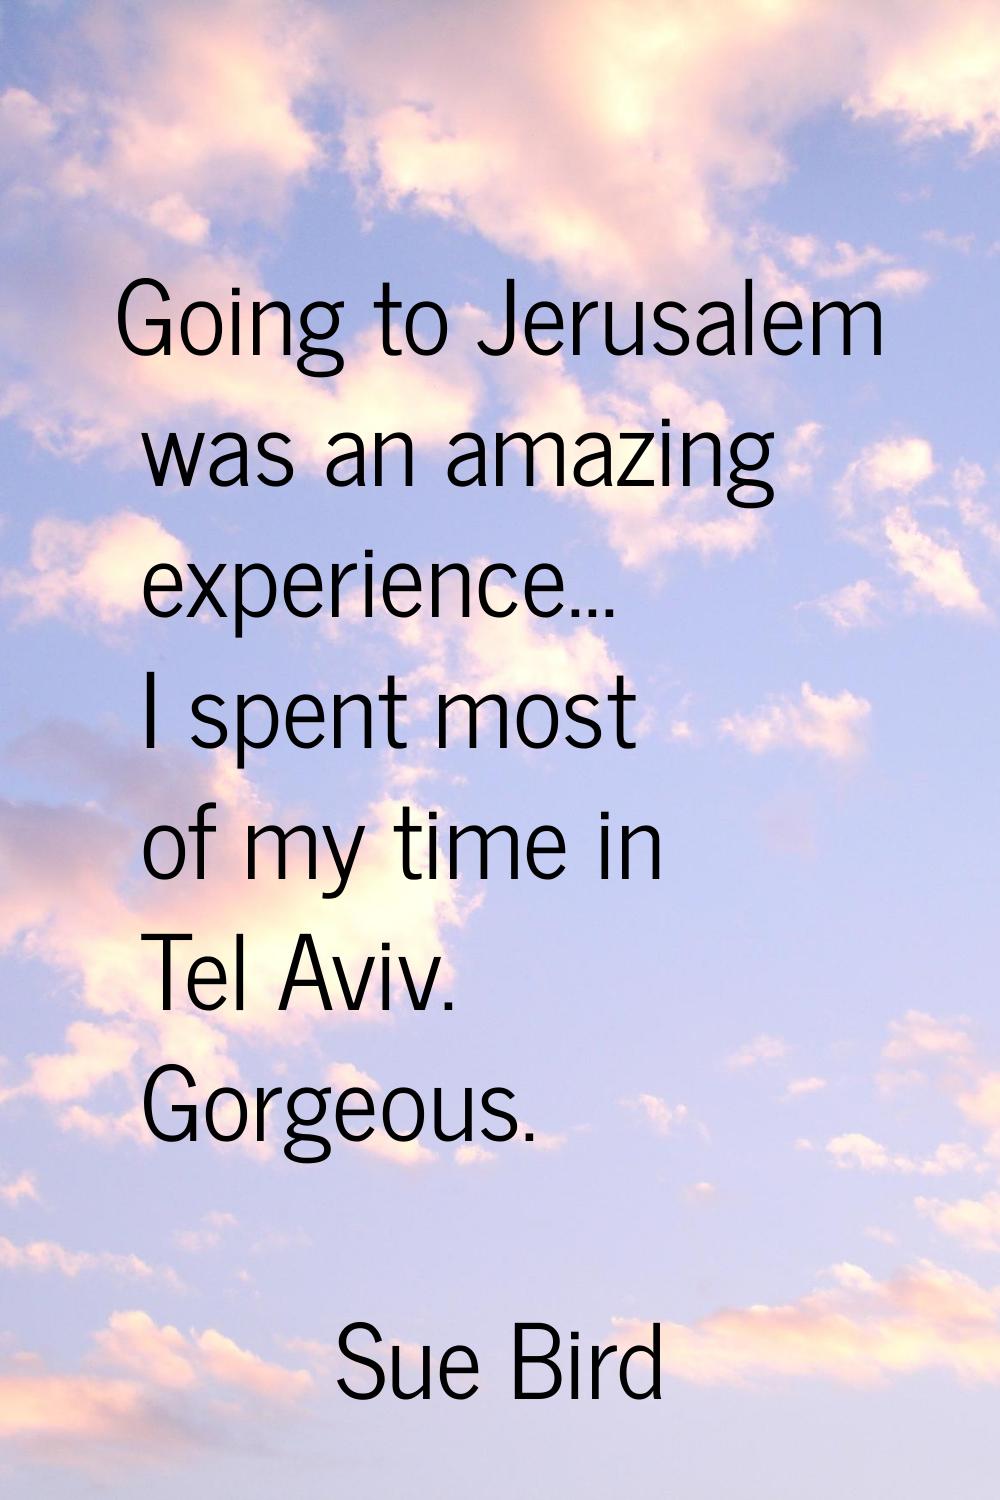 Going to Jerusalem was an amazing experience... I spent most of my time in Tel Aviv. Gorgeous.